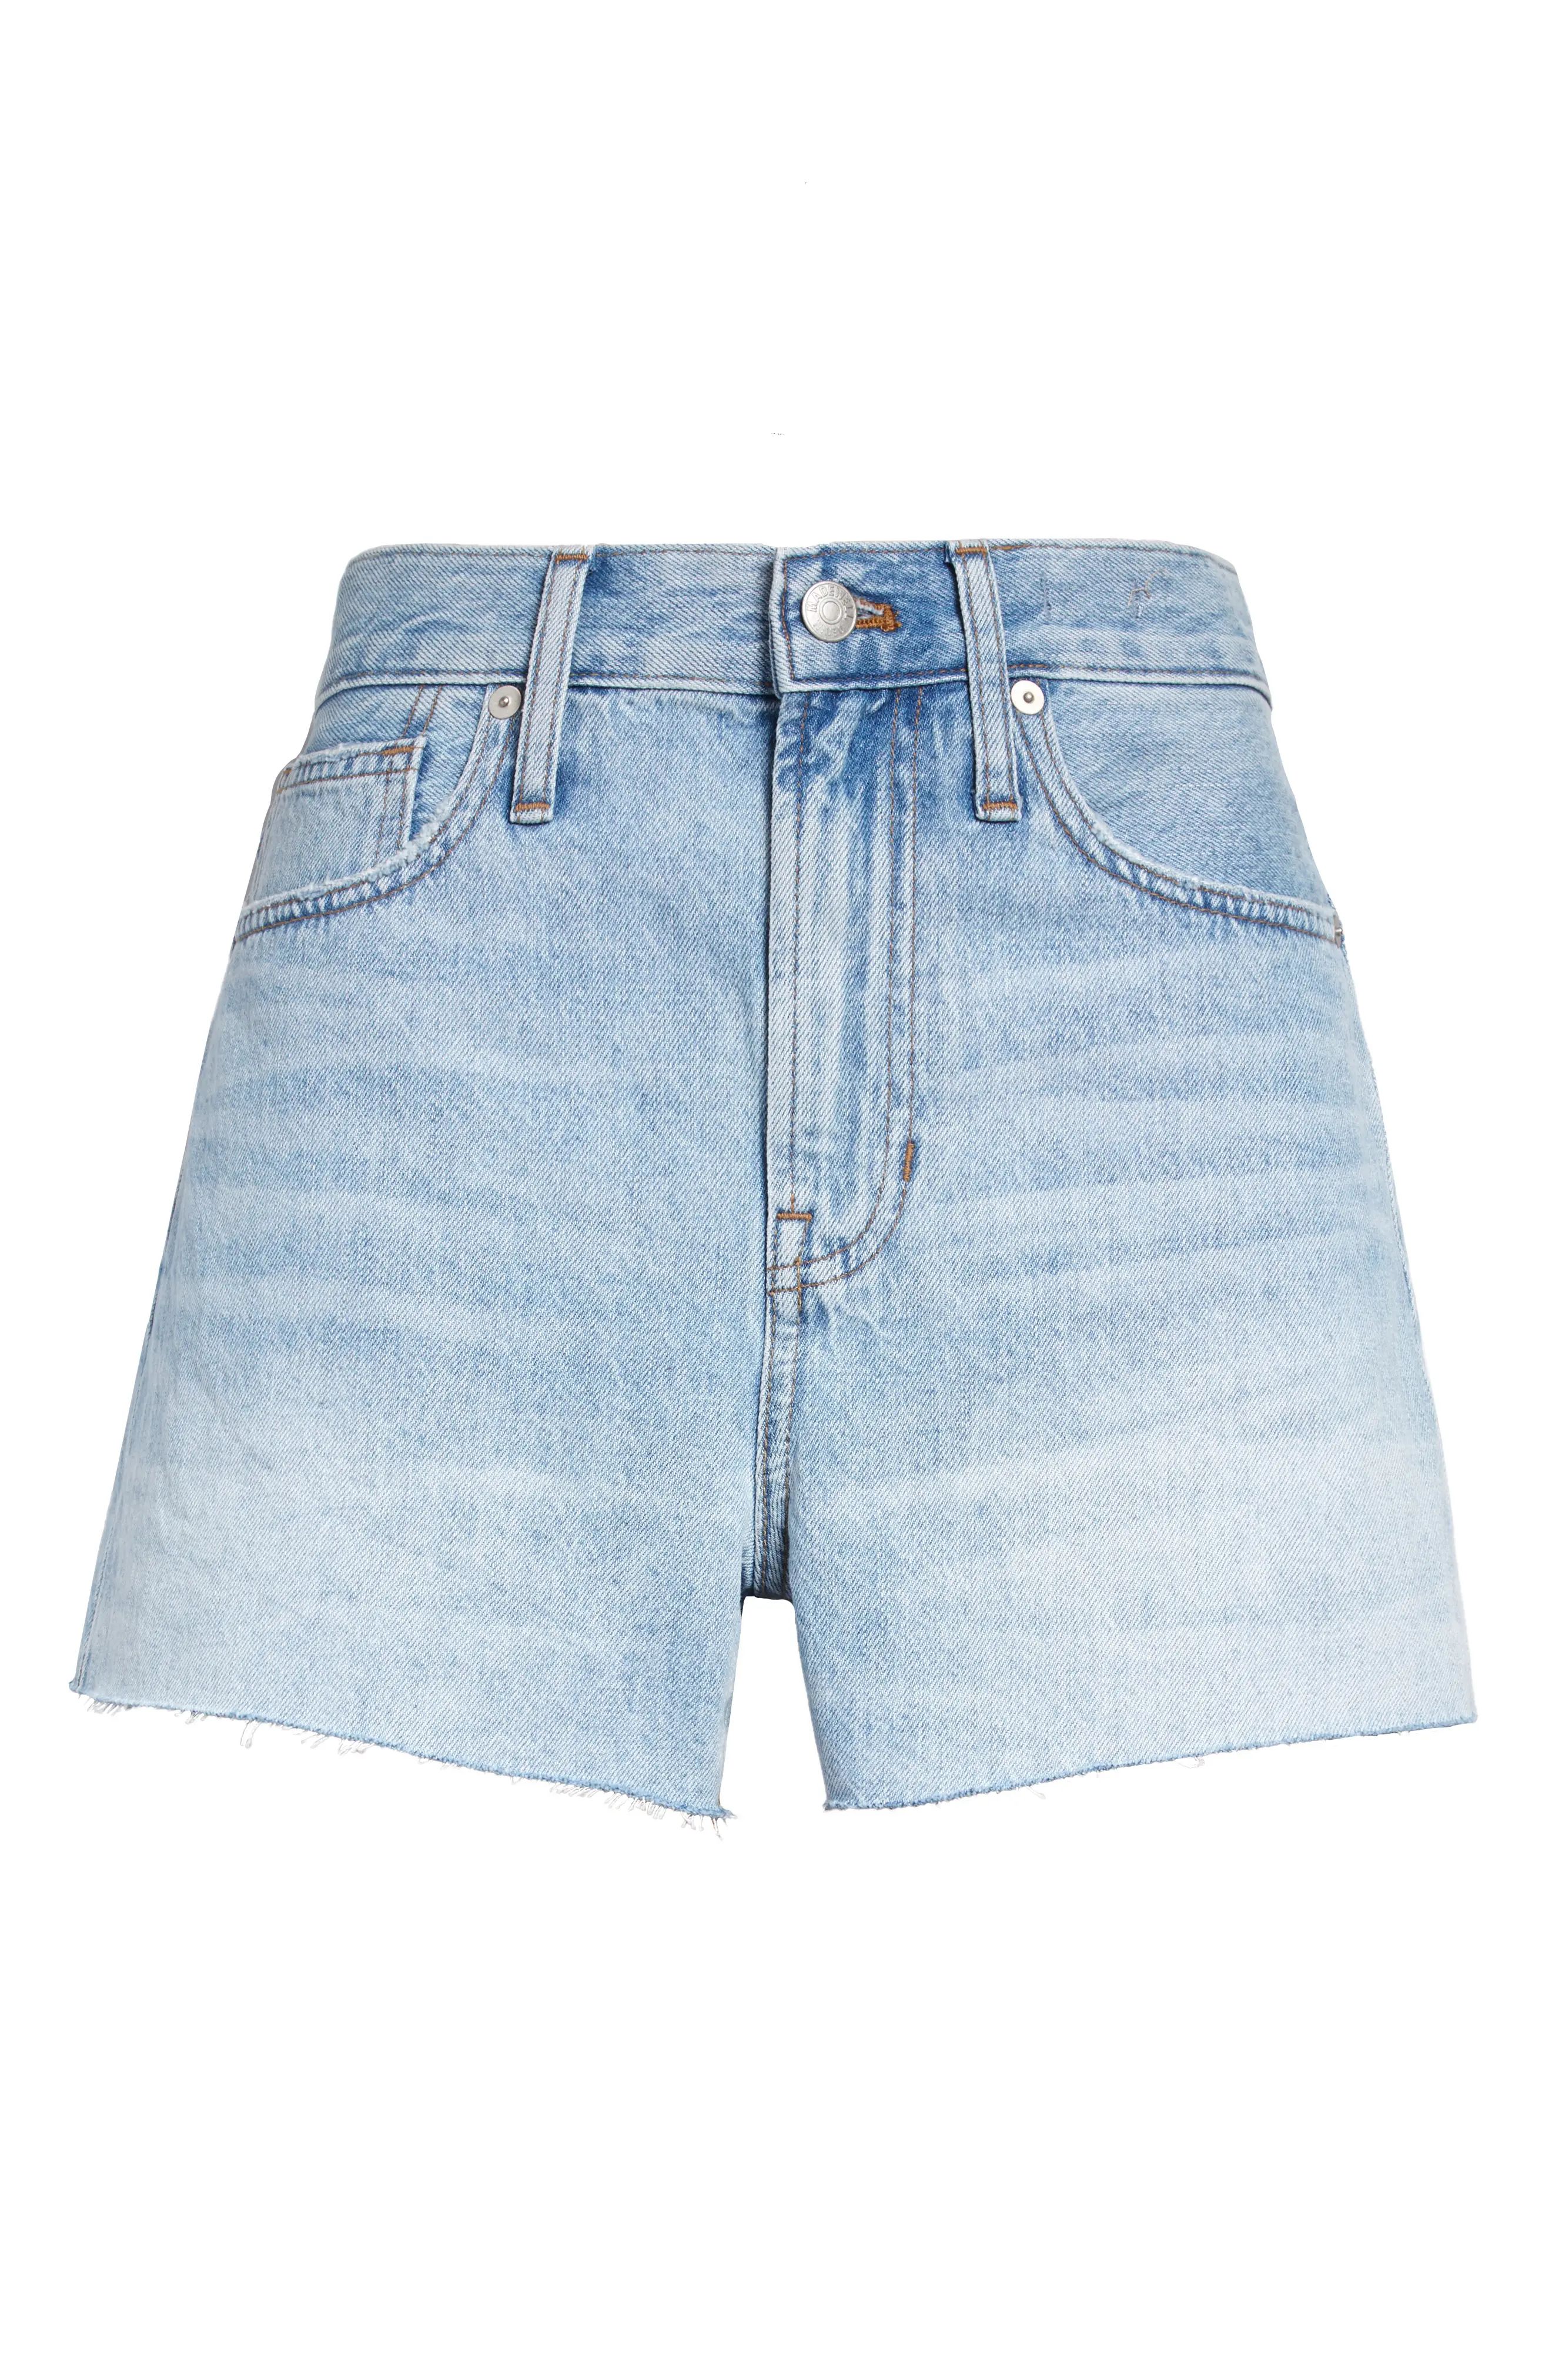 Women's Madewell The Perfect Jean Shorts, Size 23 - Blue | Nordstrom